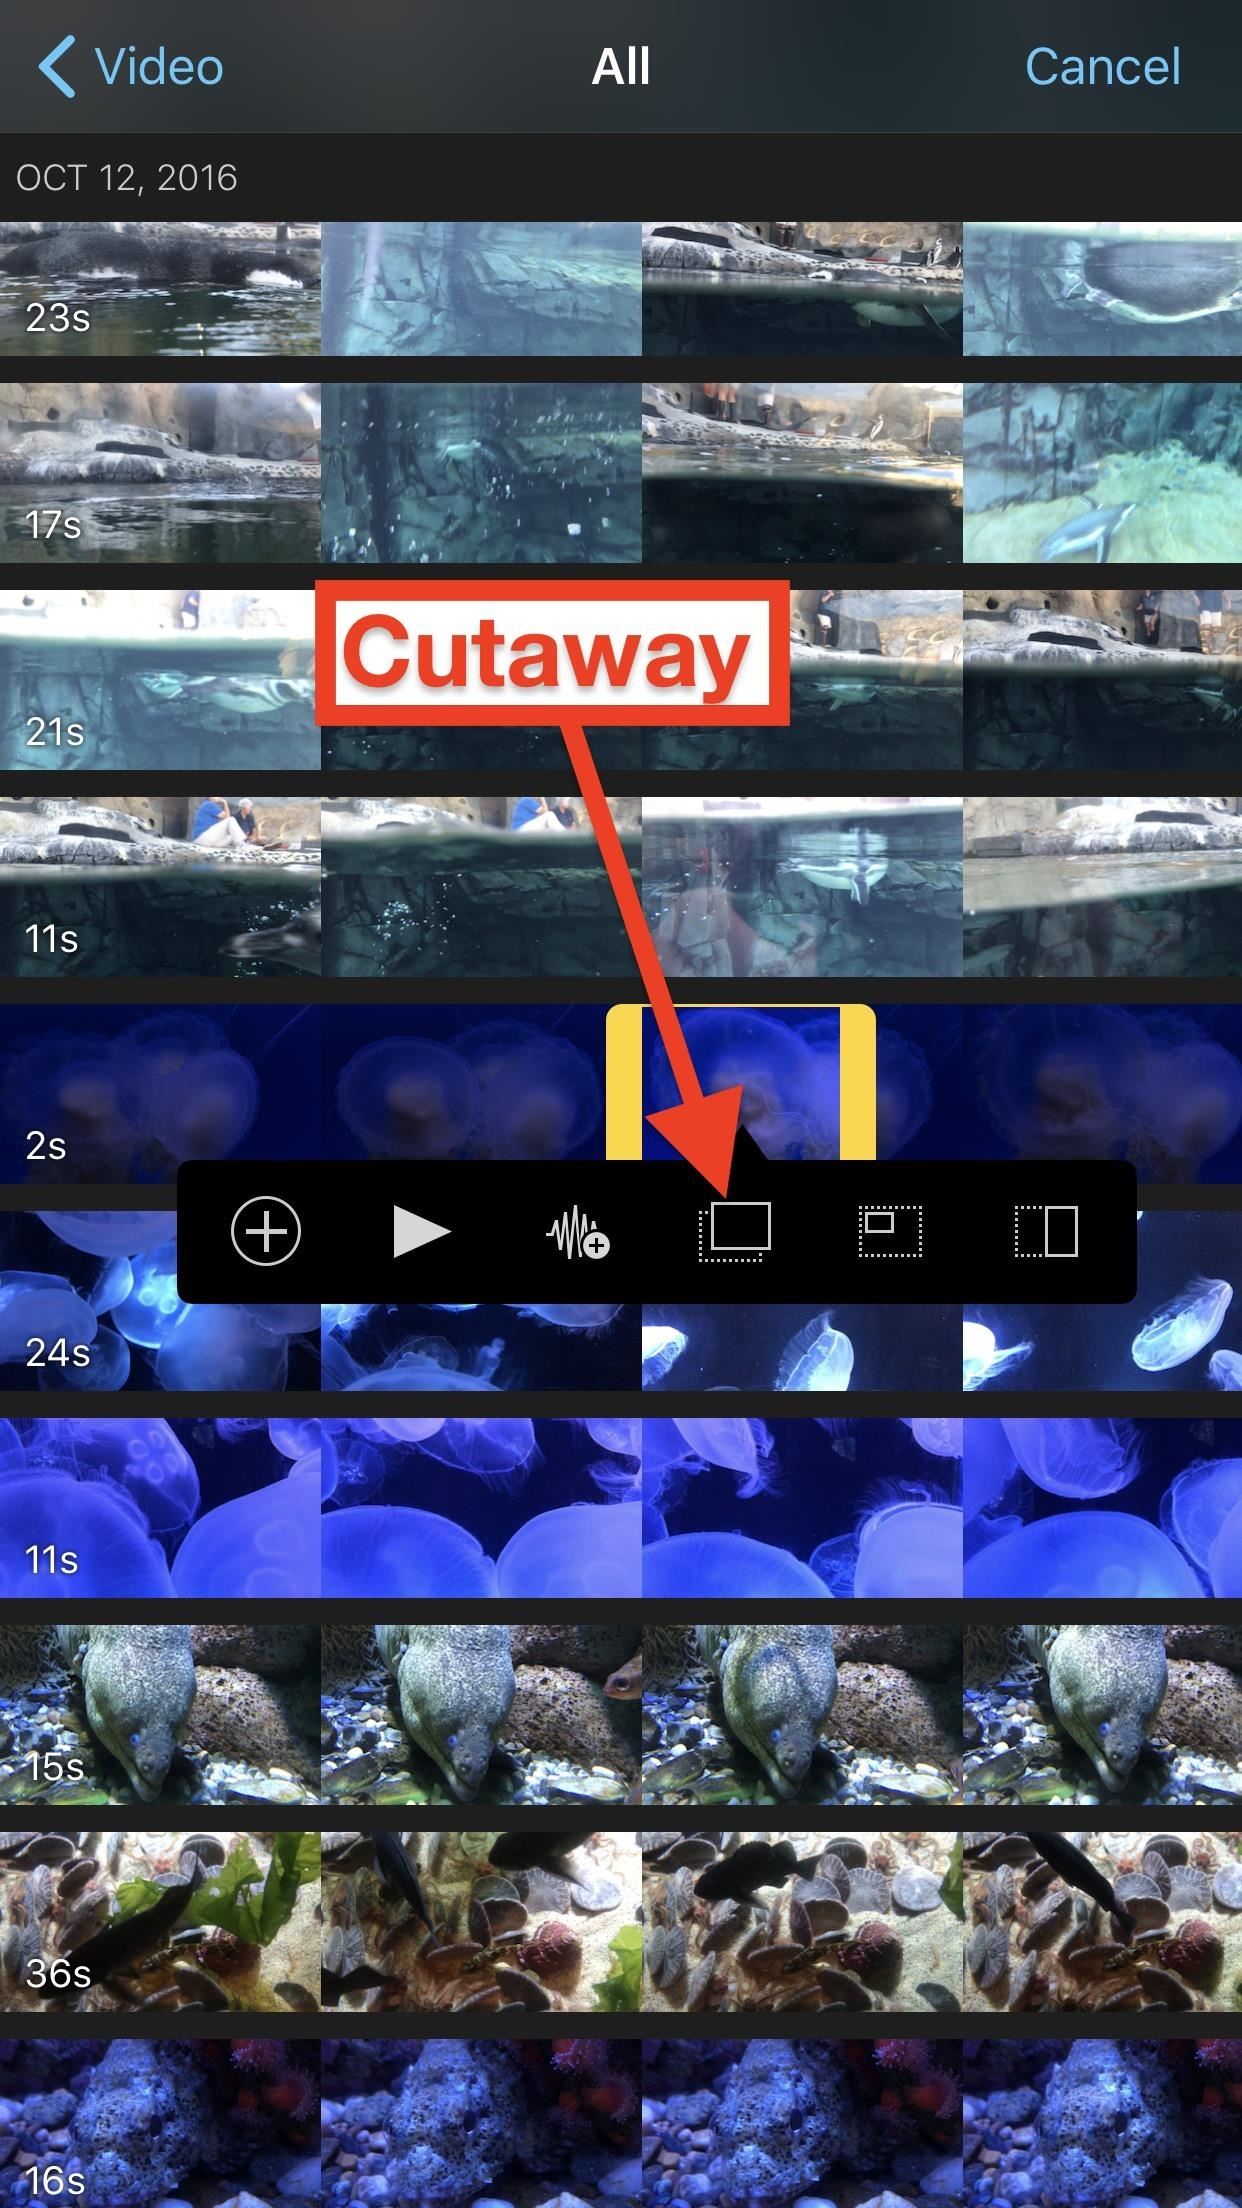 How to Add More Video Clips to iMovie Projects on Your iPhone